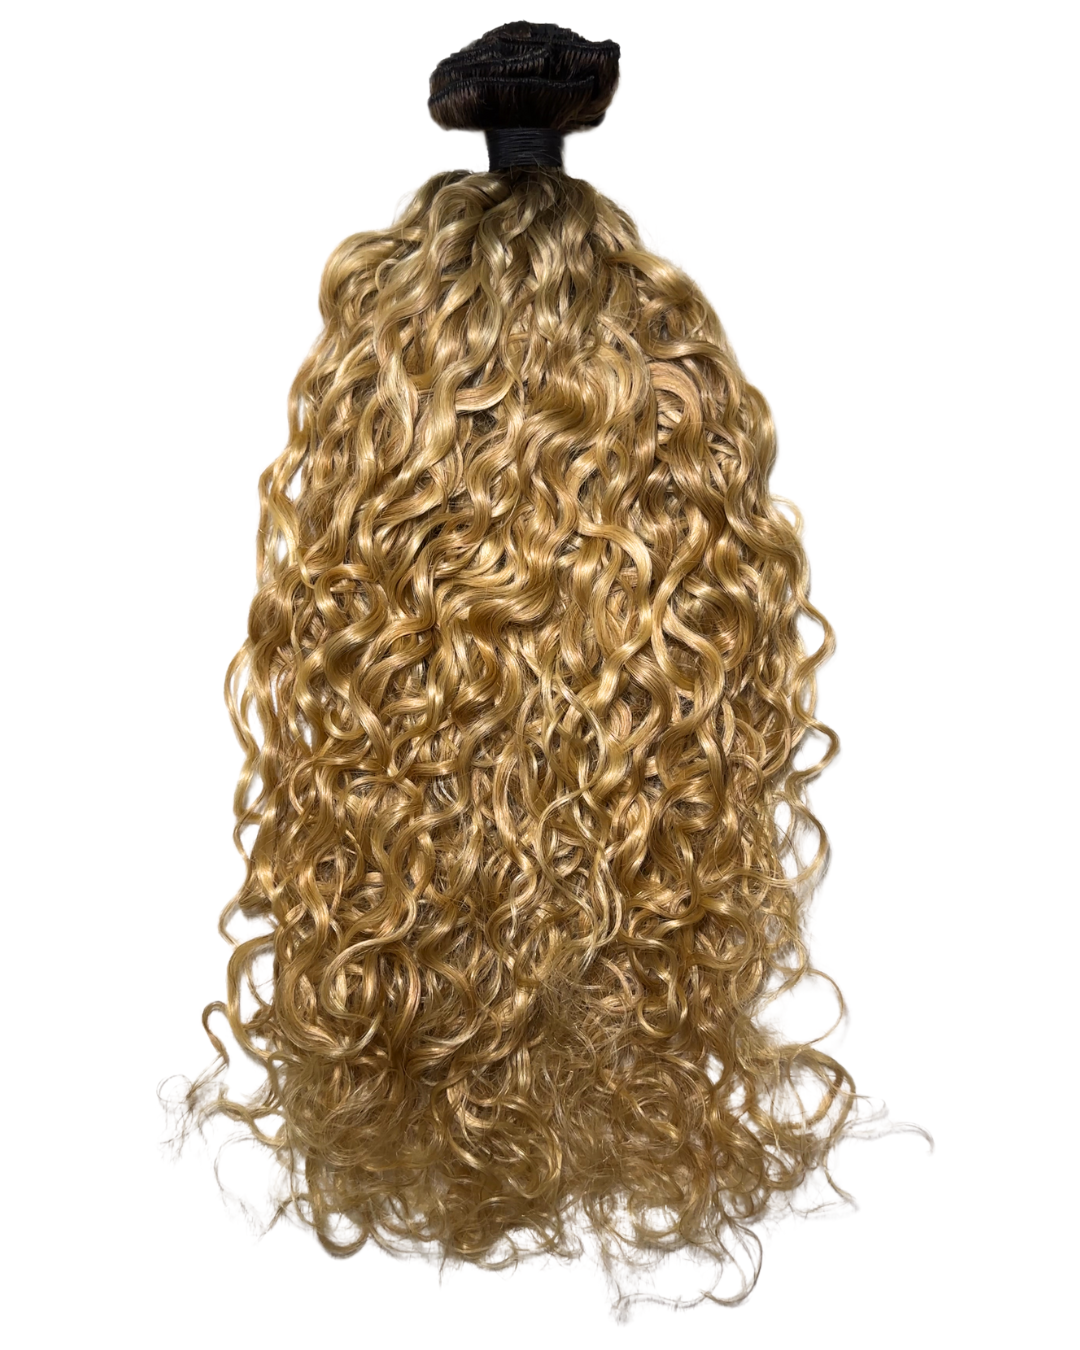 Customized 28" 360g Beach Wavy #2 Rooted Honey Blonde/Lightest Blonde Clip-in Set